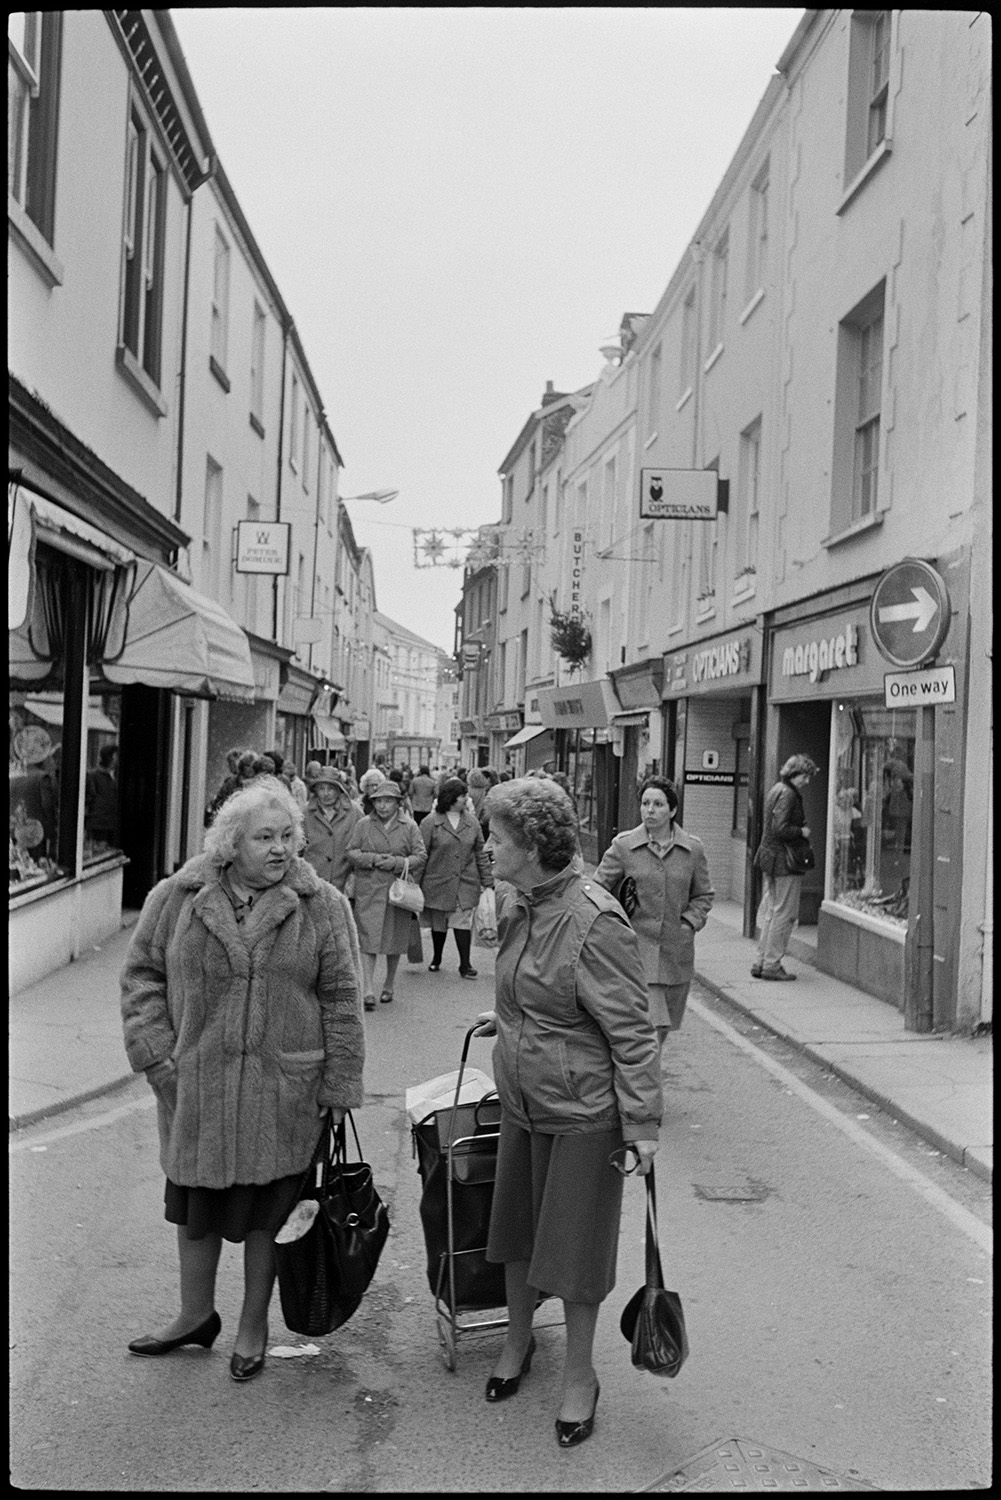 Town street scenes with women chatting holding shopping baskets. 
[Two women talking in Mill Street, Bideford. One of them is pulling a shopping basket. Other shoppers can be seen in the street as well as shop fronts, including an opticians and butcher. The street has Christmas decorations hung across it.]